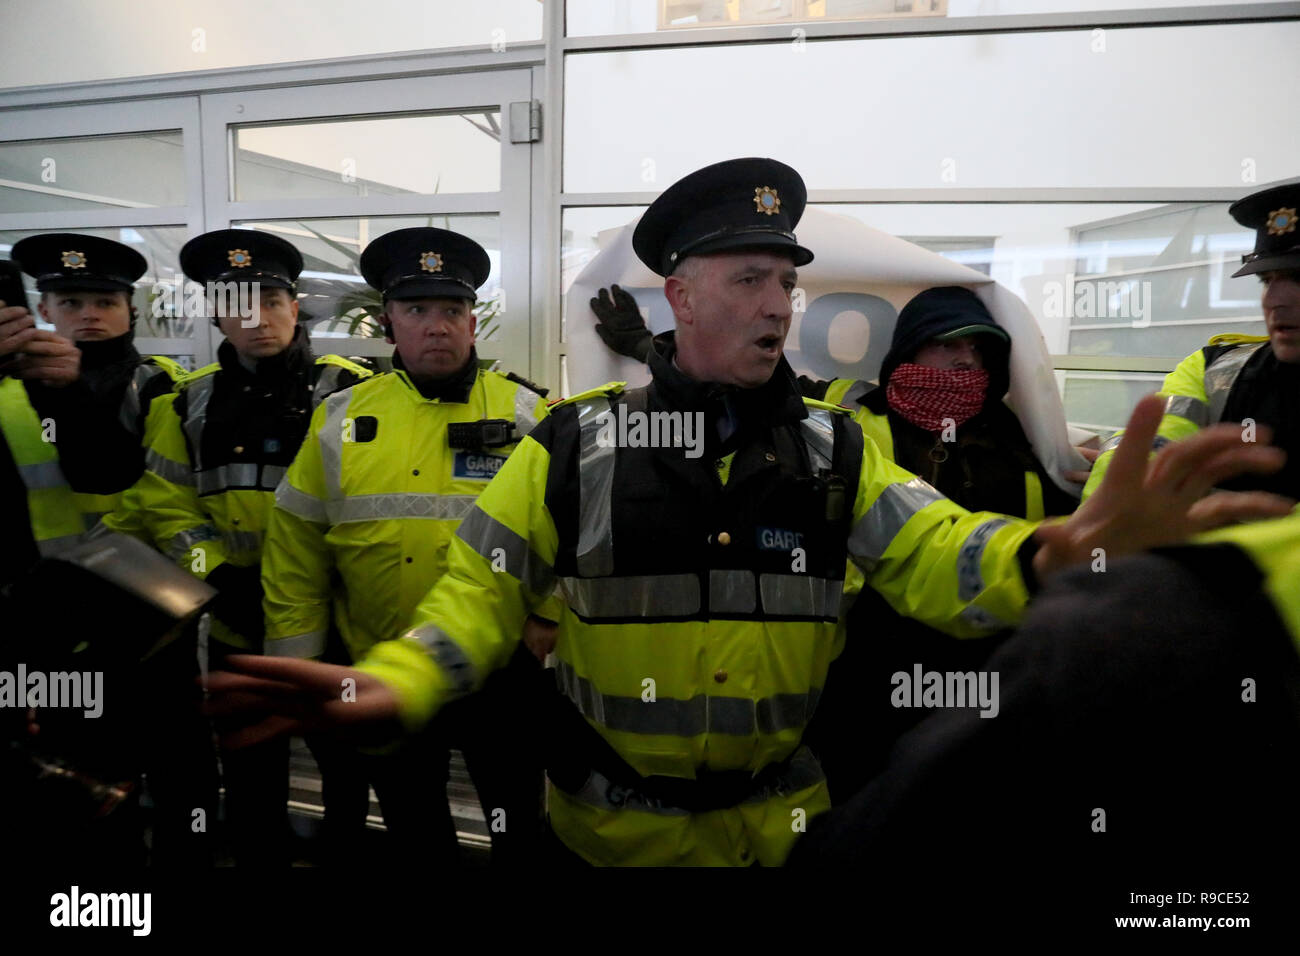 Members of the Garda protect the entrance to the KBC Bank on Sandwith Street in Dublin as Yellow Vest Ireland protestors approach during a demonstration against the Irish government's record on a range of social issues, including the housing crisis and recent evictions. Stock Photo